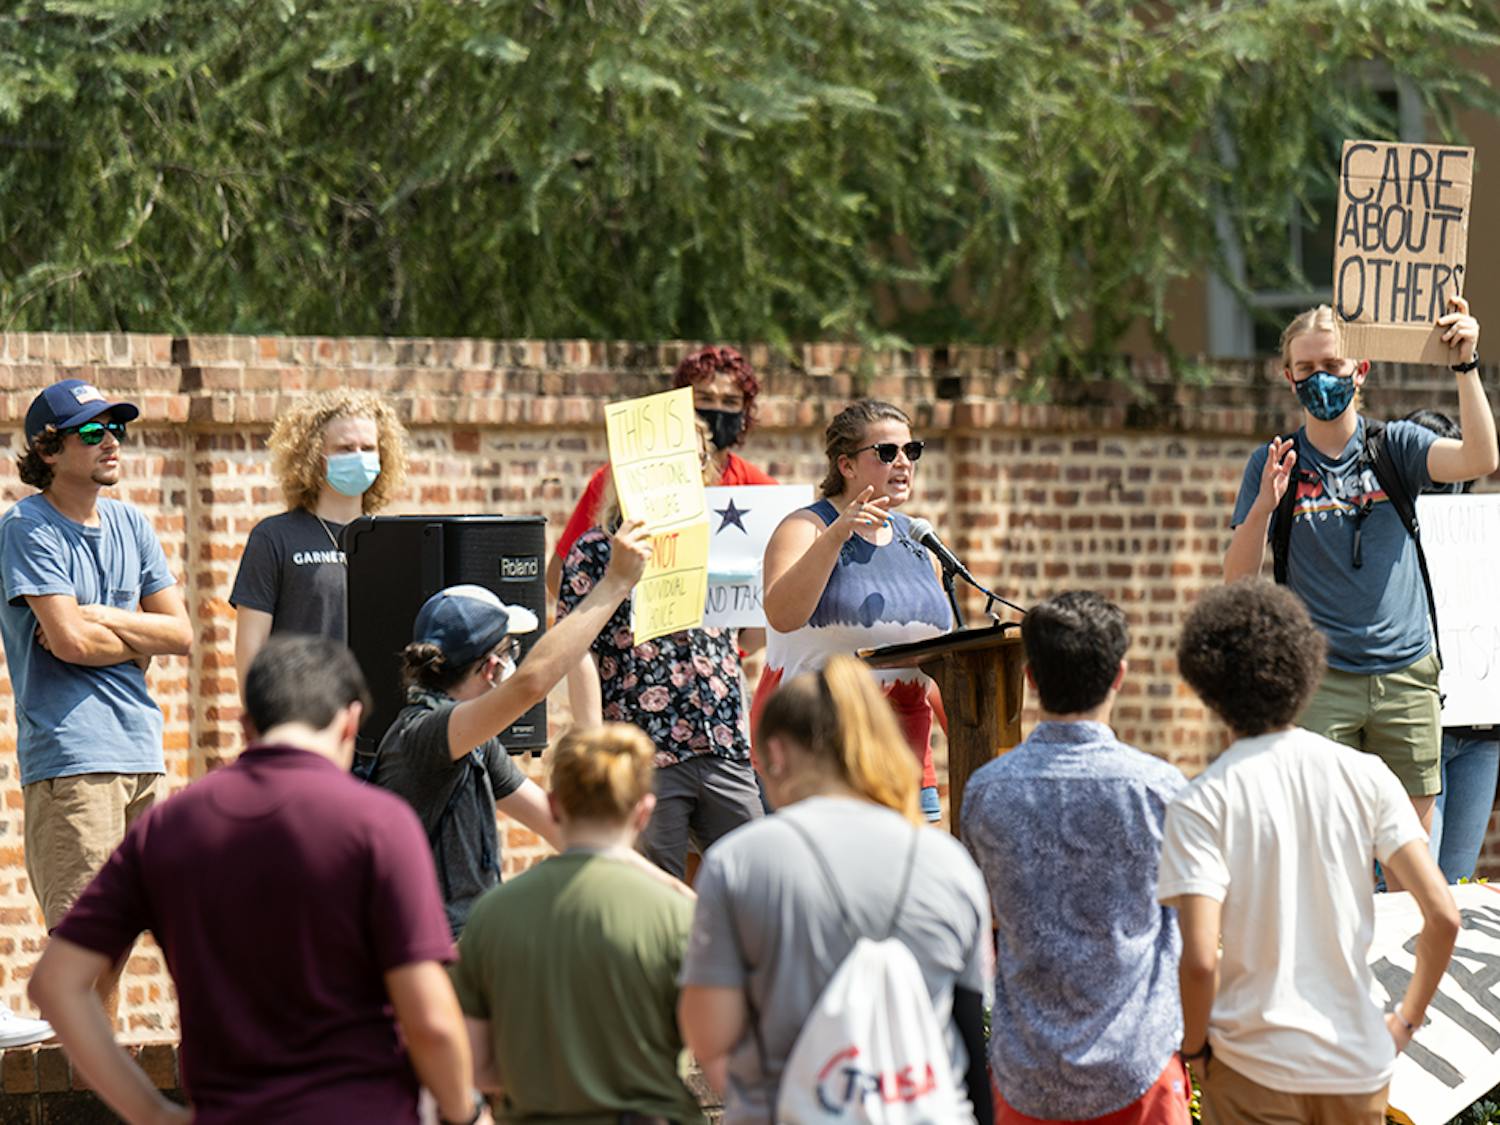 Members of the USC Turning Point USA chapter on Greene Street give speeches on their stance on the mask mandate. The Carolina Socialists counterprotested the speakers with their own opinions.&nbsp;